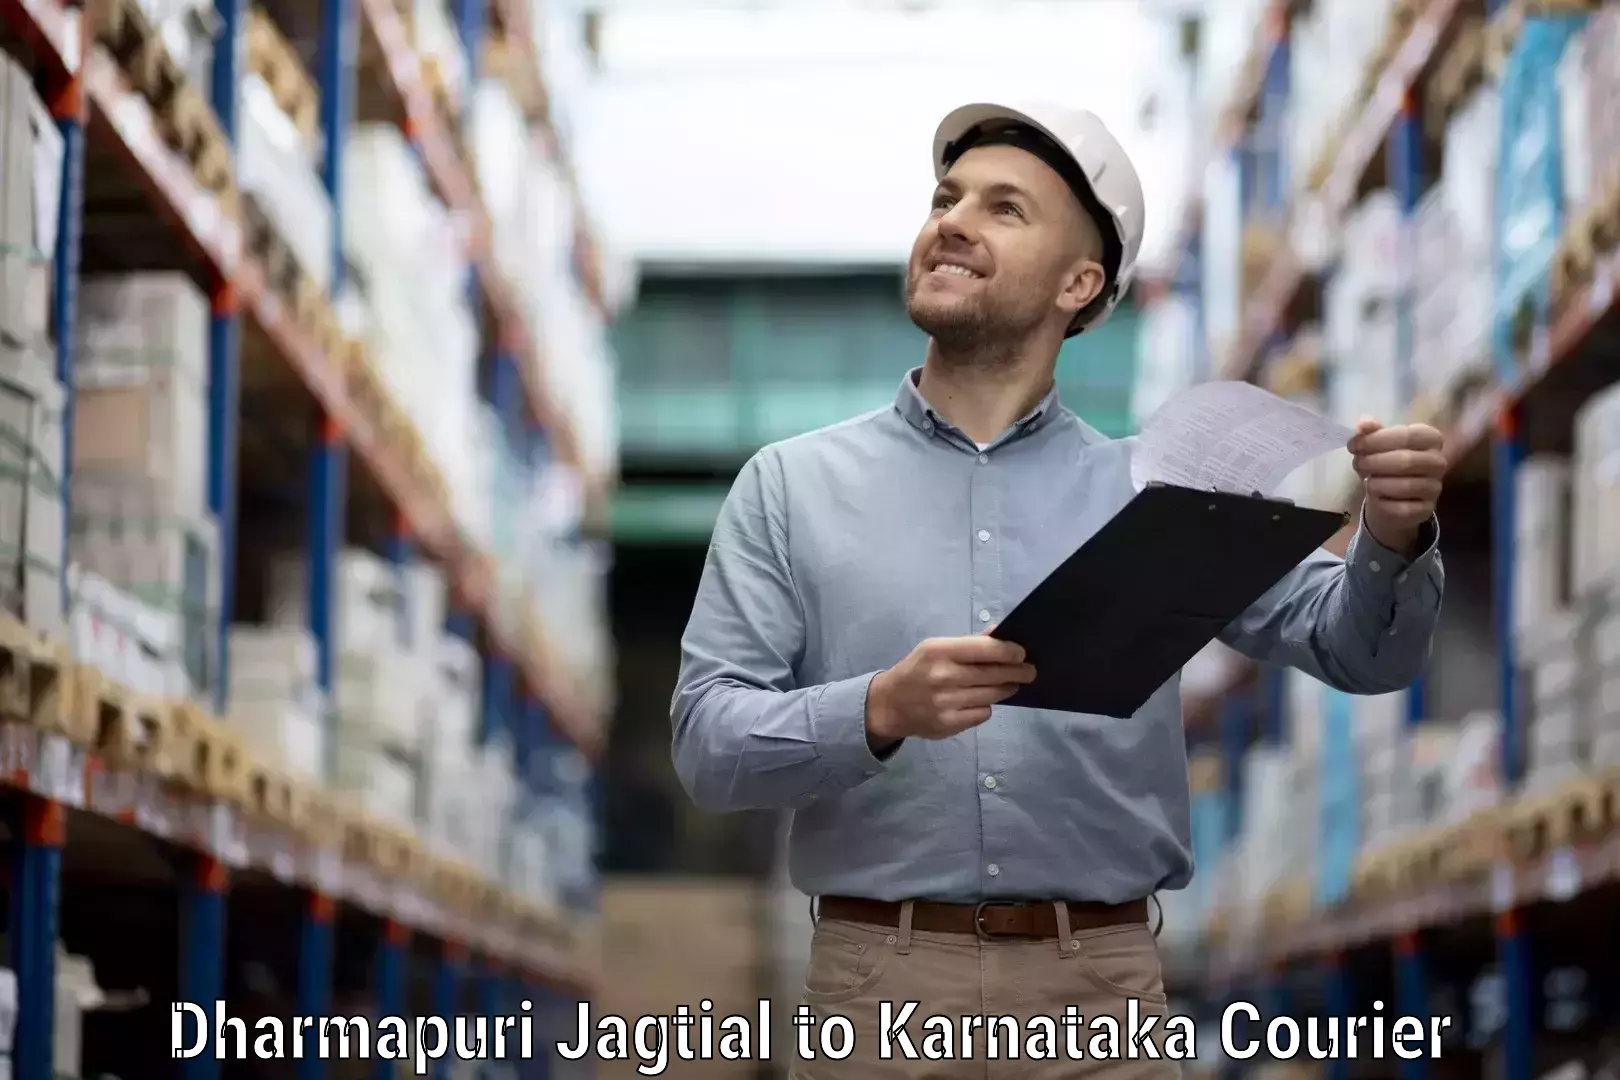 Comprehensive shipping services Dharmapuri Jagtial to Puttur